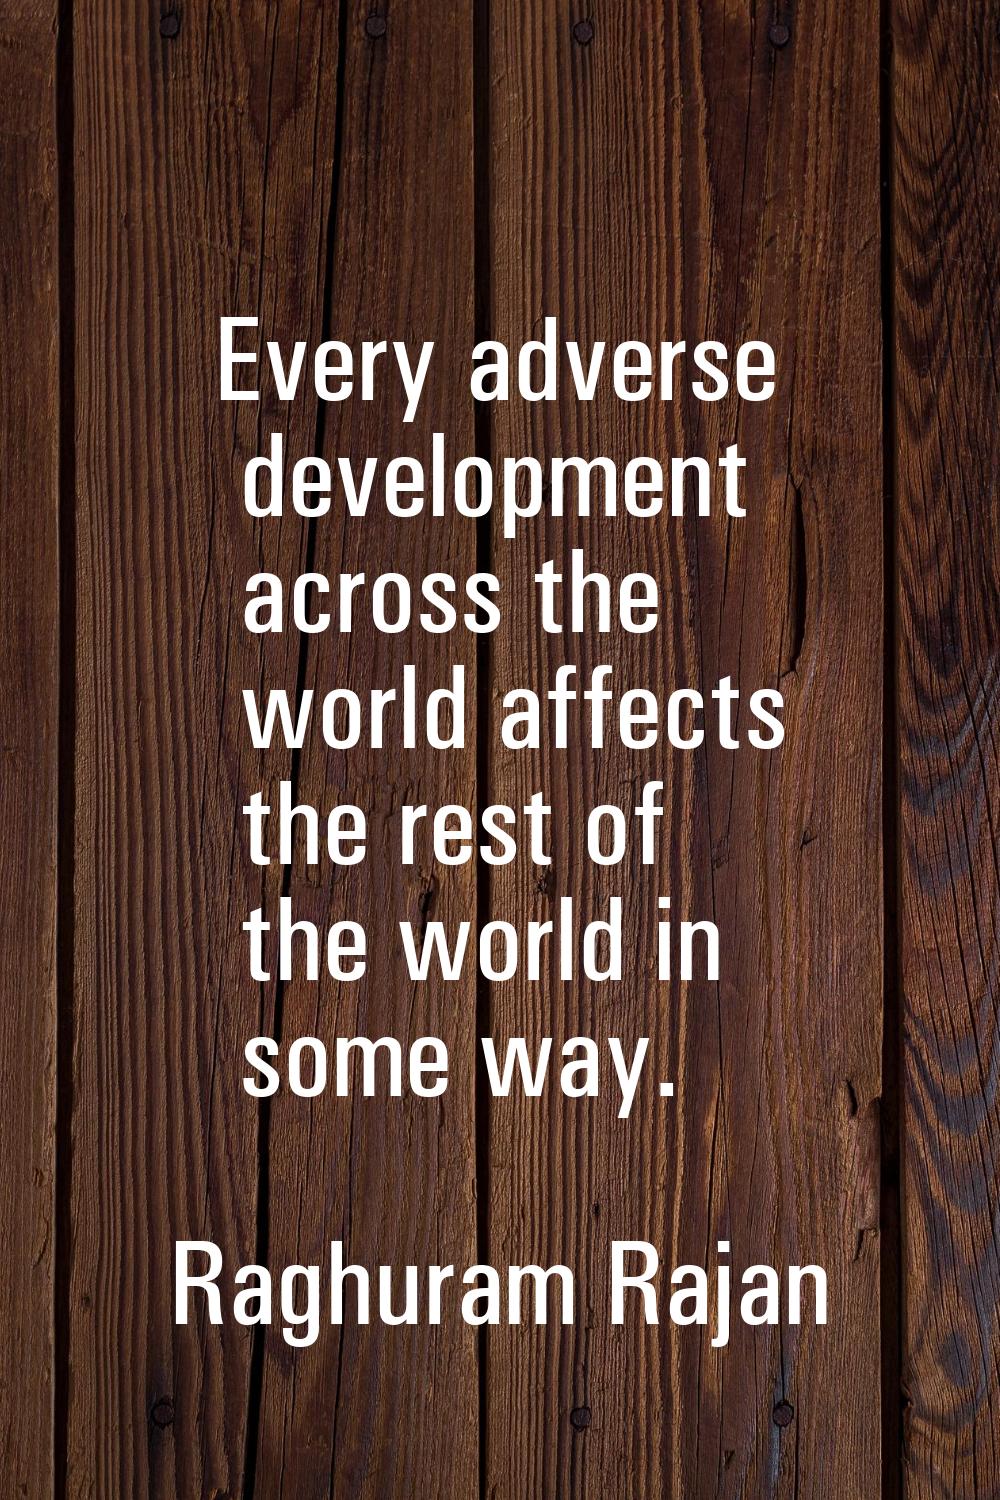 Every adverse development across the world affects the rest of the world in some way.